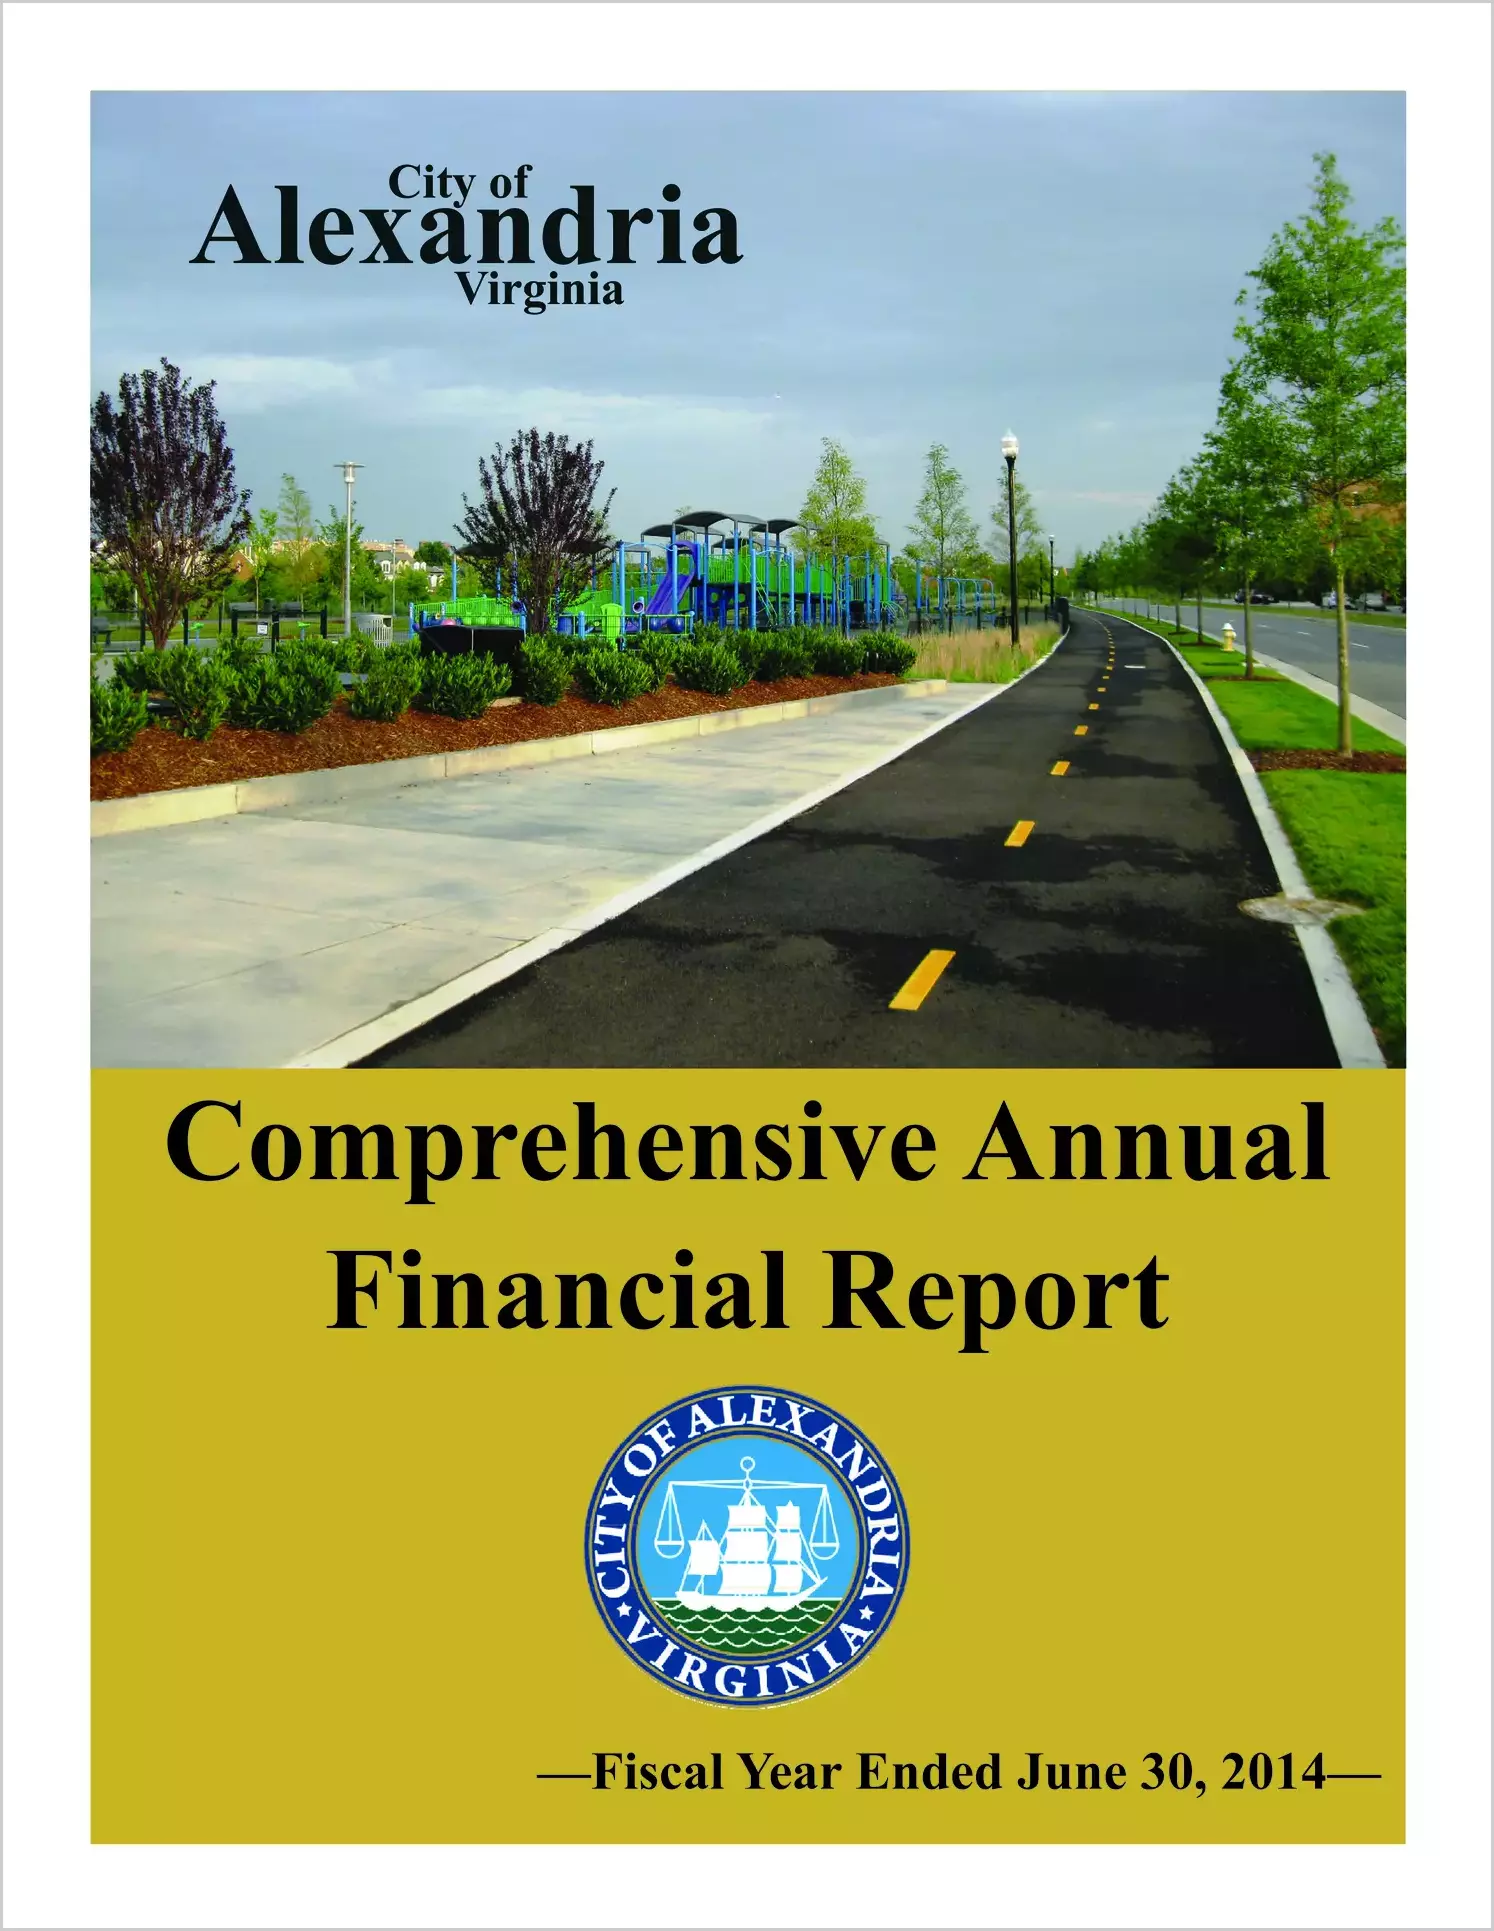 2014 Annual Financial Report for City of Alexandria